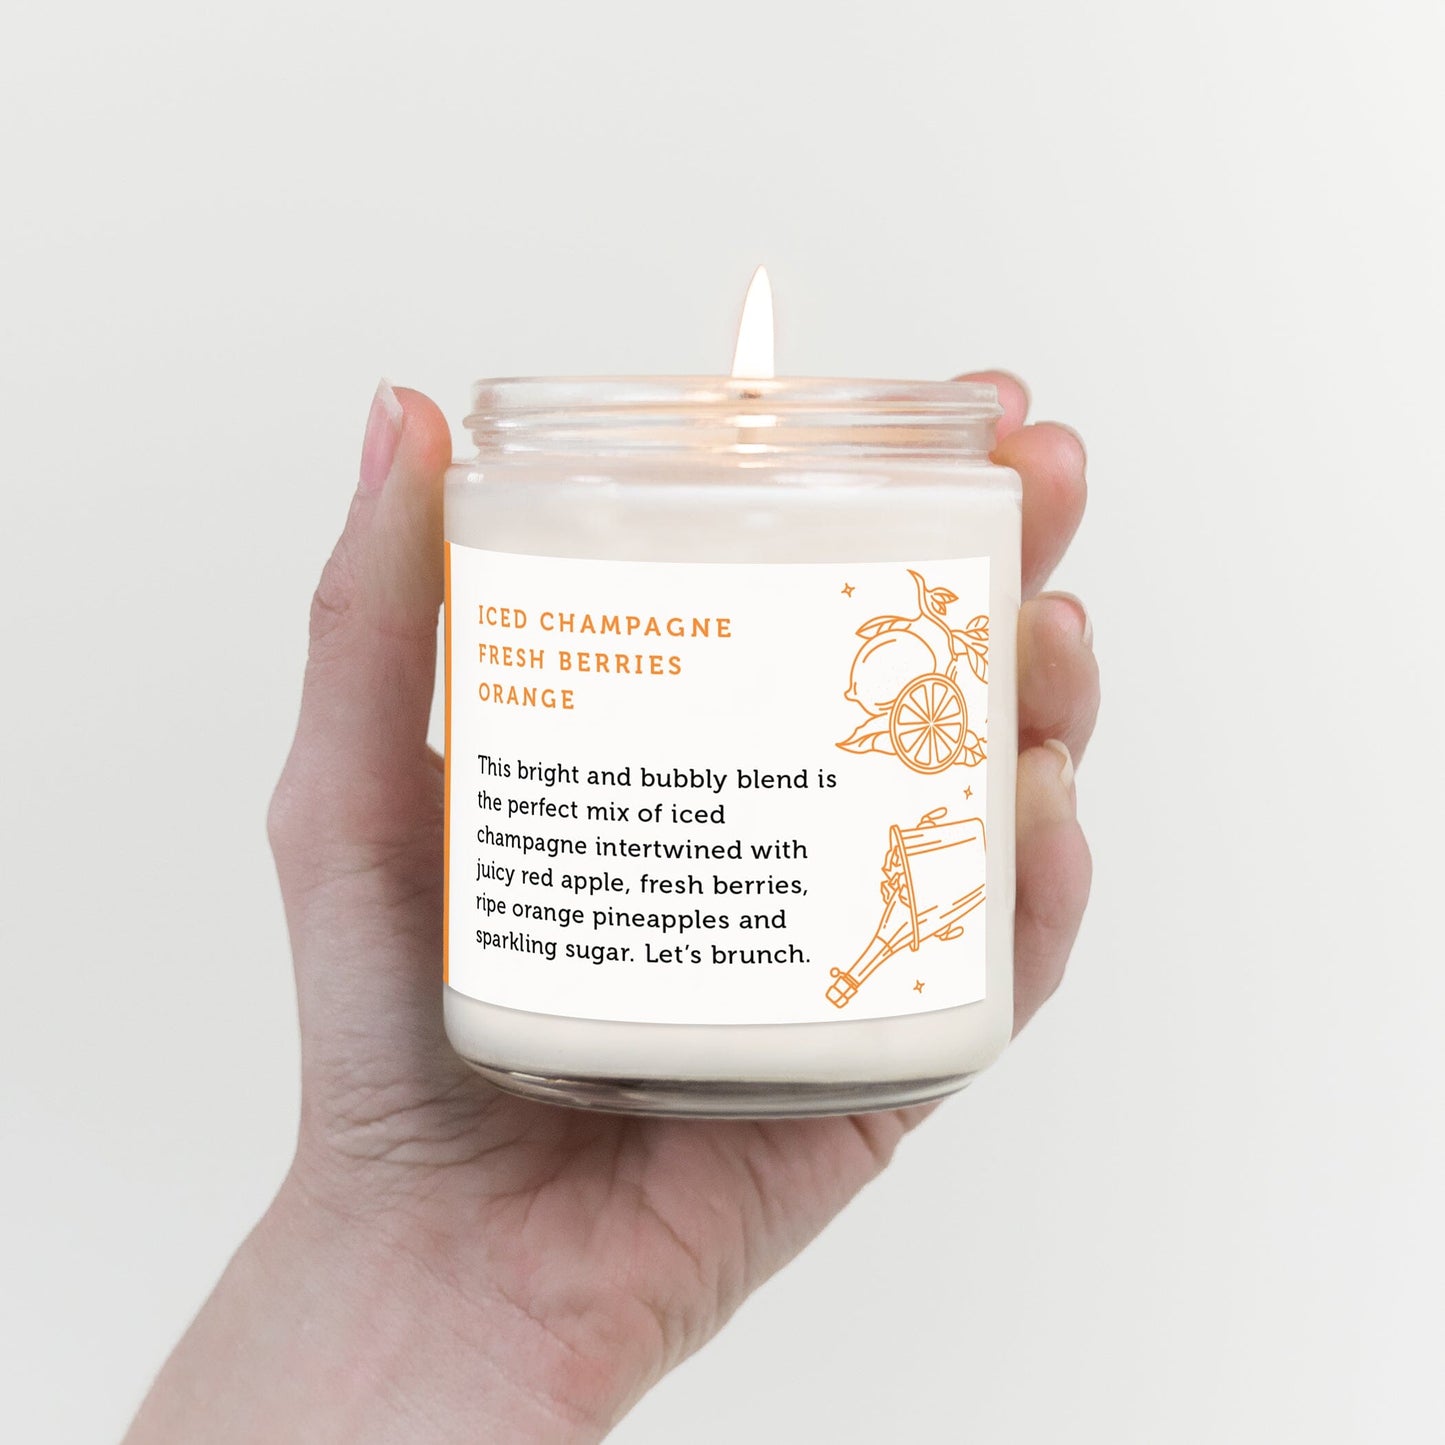 Bottomless Mimosas Candle Candles CE Craft 